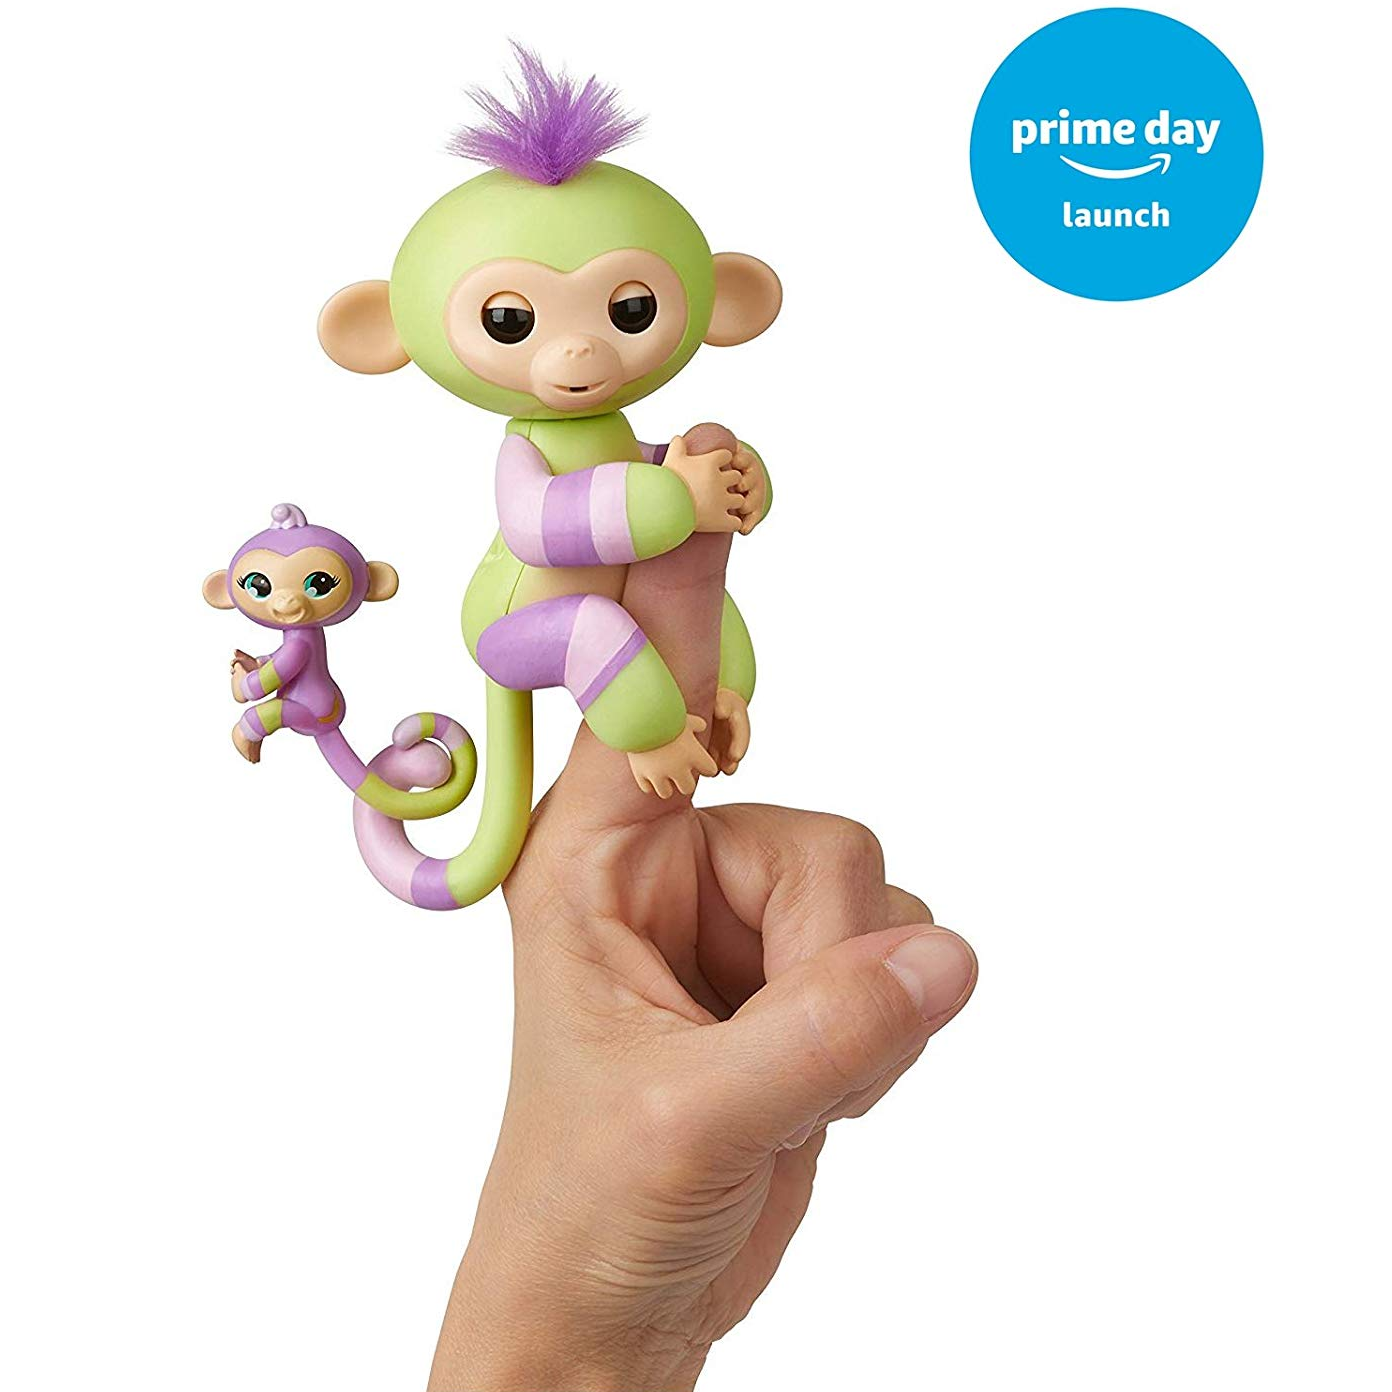 PRIME DAY DEALS ARE LIVE!! Prime Day Special WowWee Fingerlings Baby Money & Mini Bffs Only $14.99!